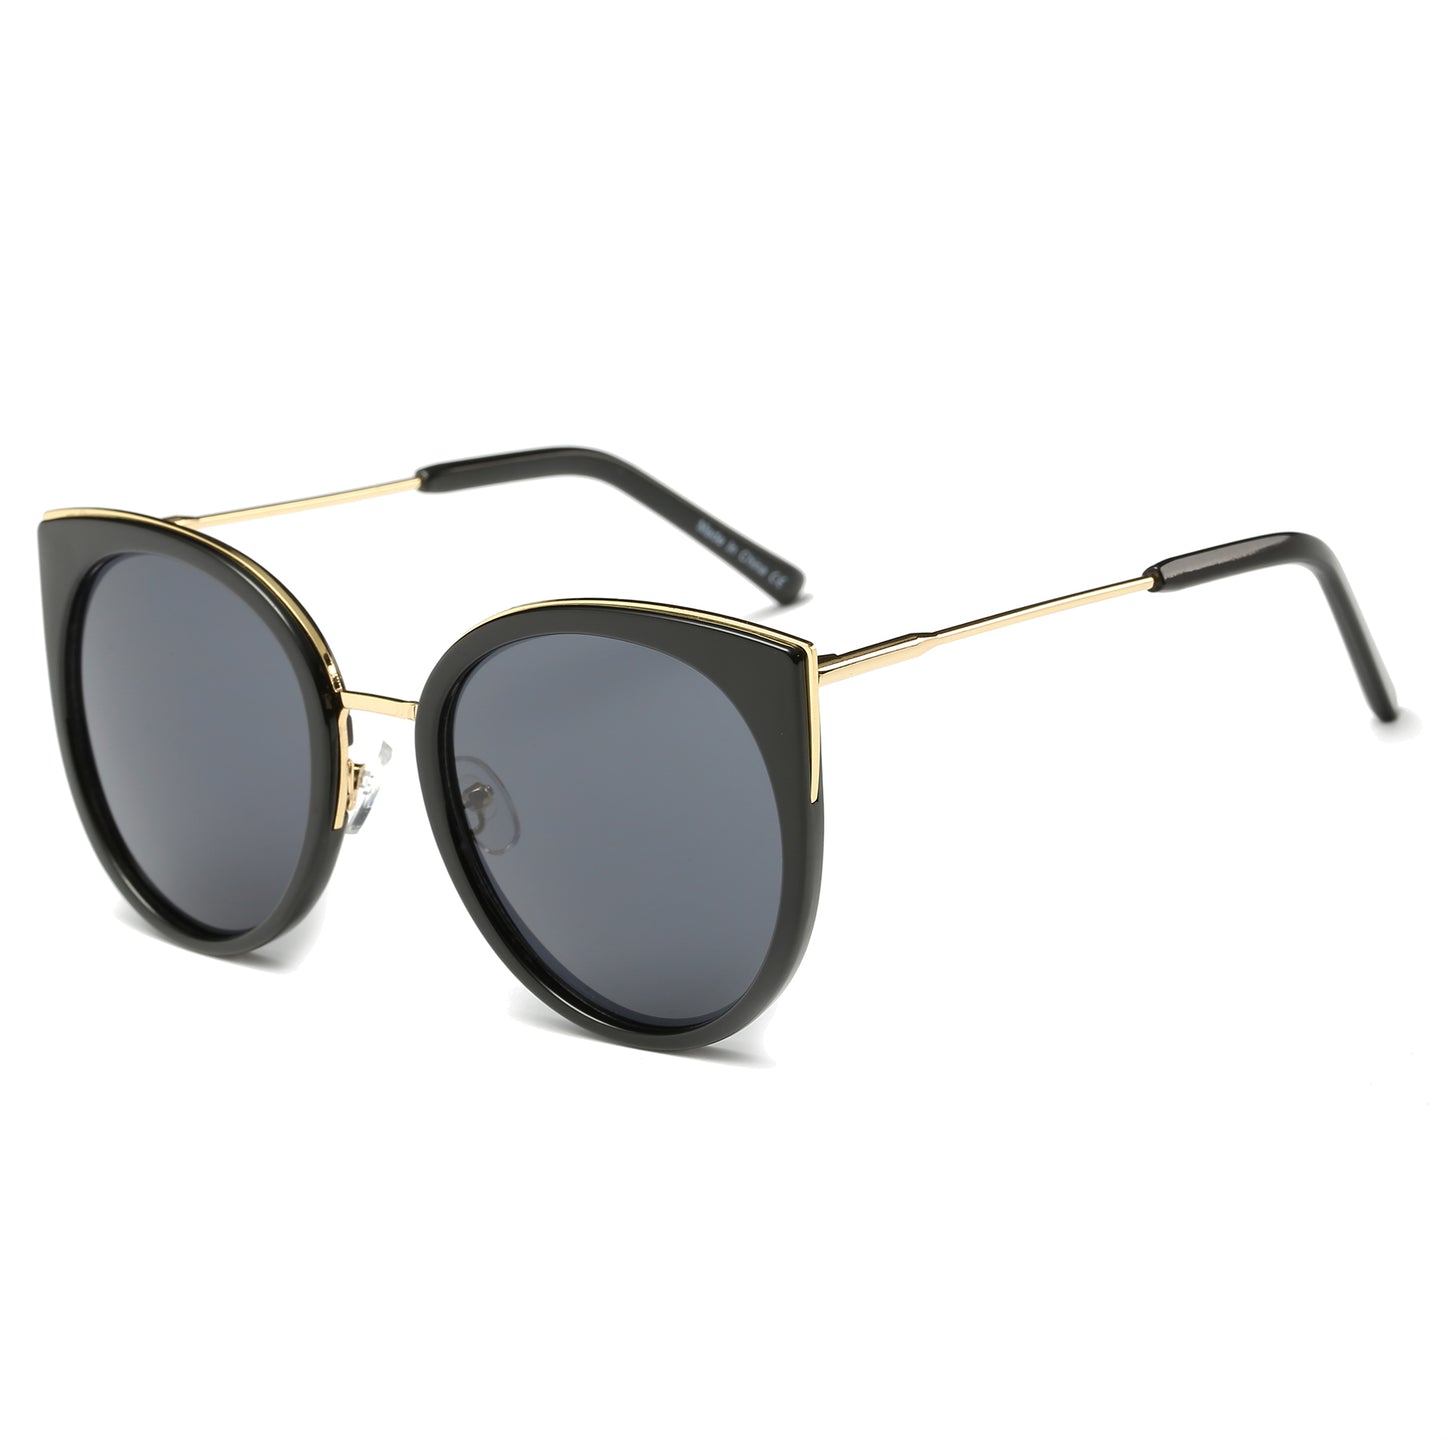 PALISADES SUNGLASS IN BLACK with GRAY LENSES